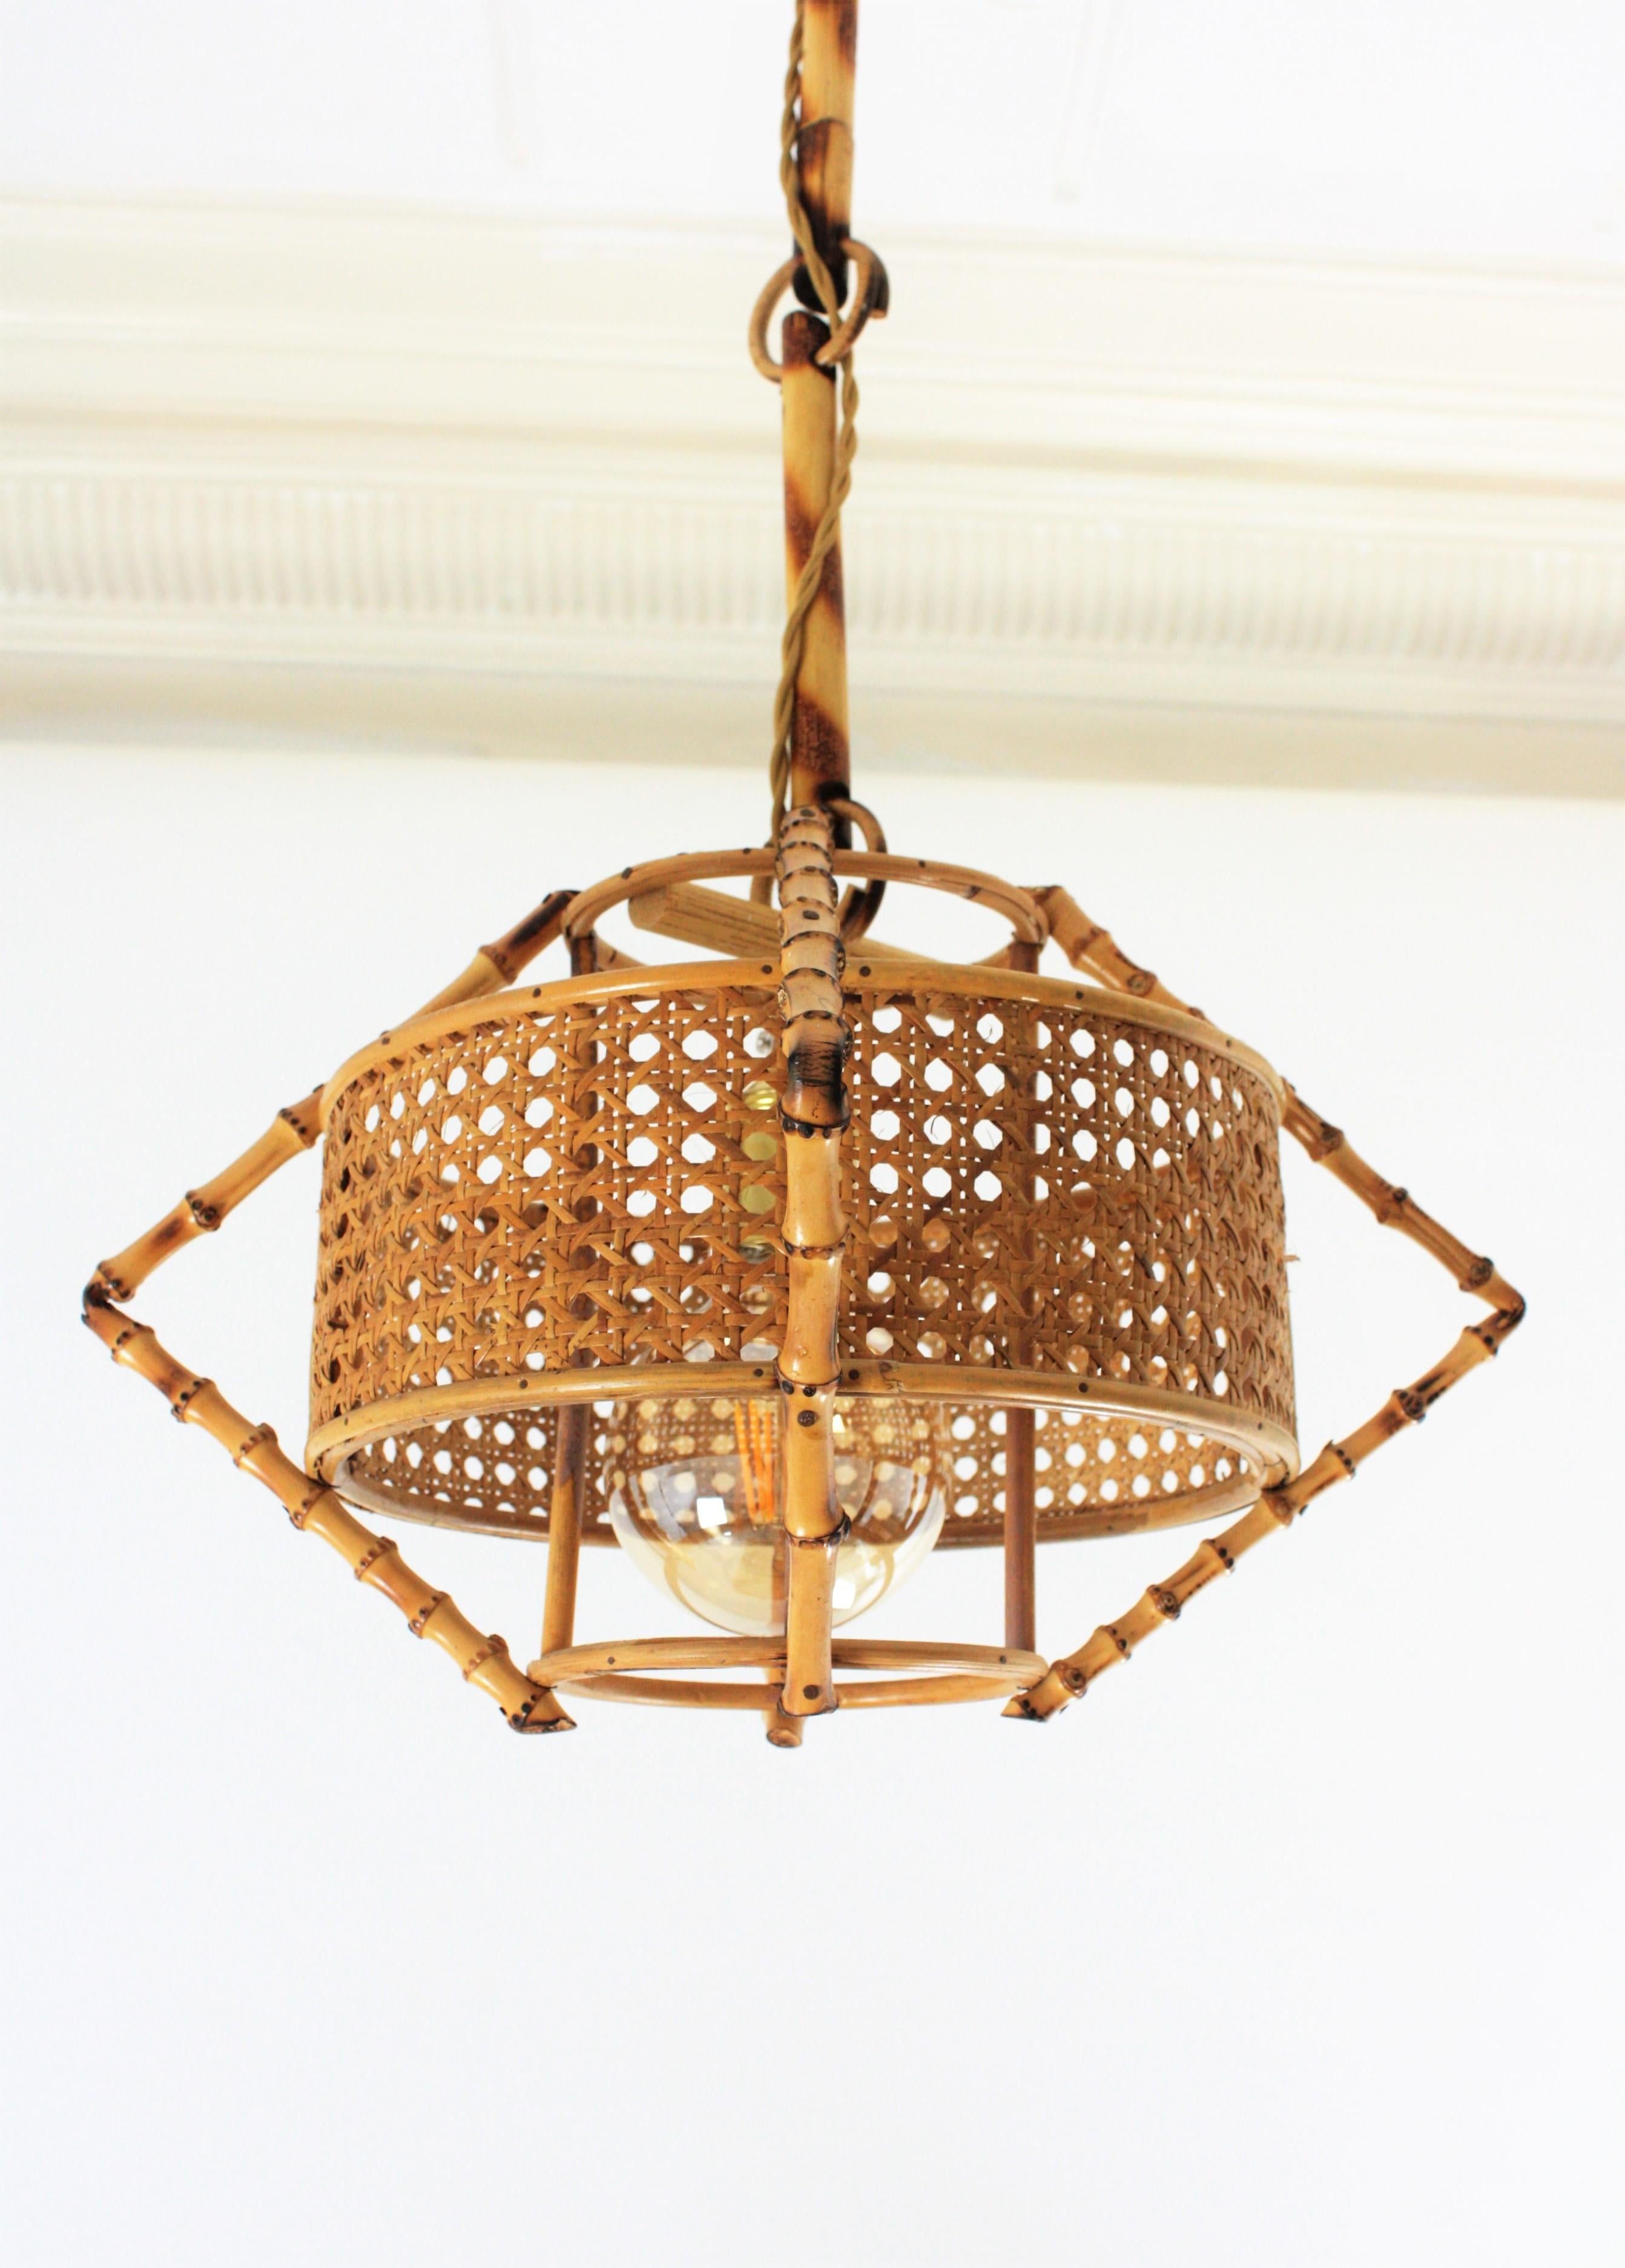 Hand-Crafted Spanish Mid-Century Modern Bamboo Rattan & Wicker Pendant Lamp with Tiki Accents